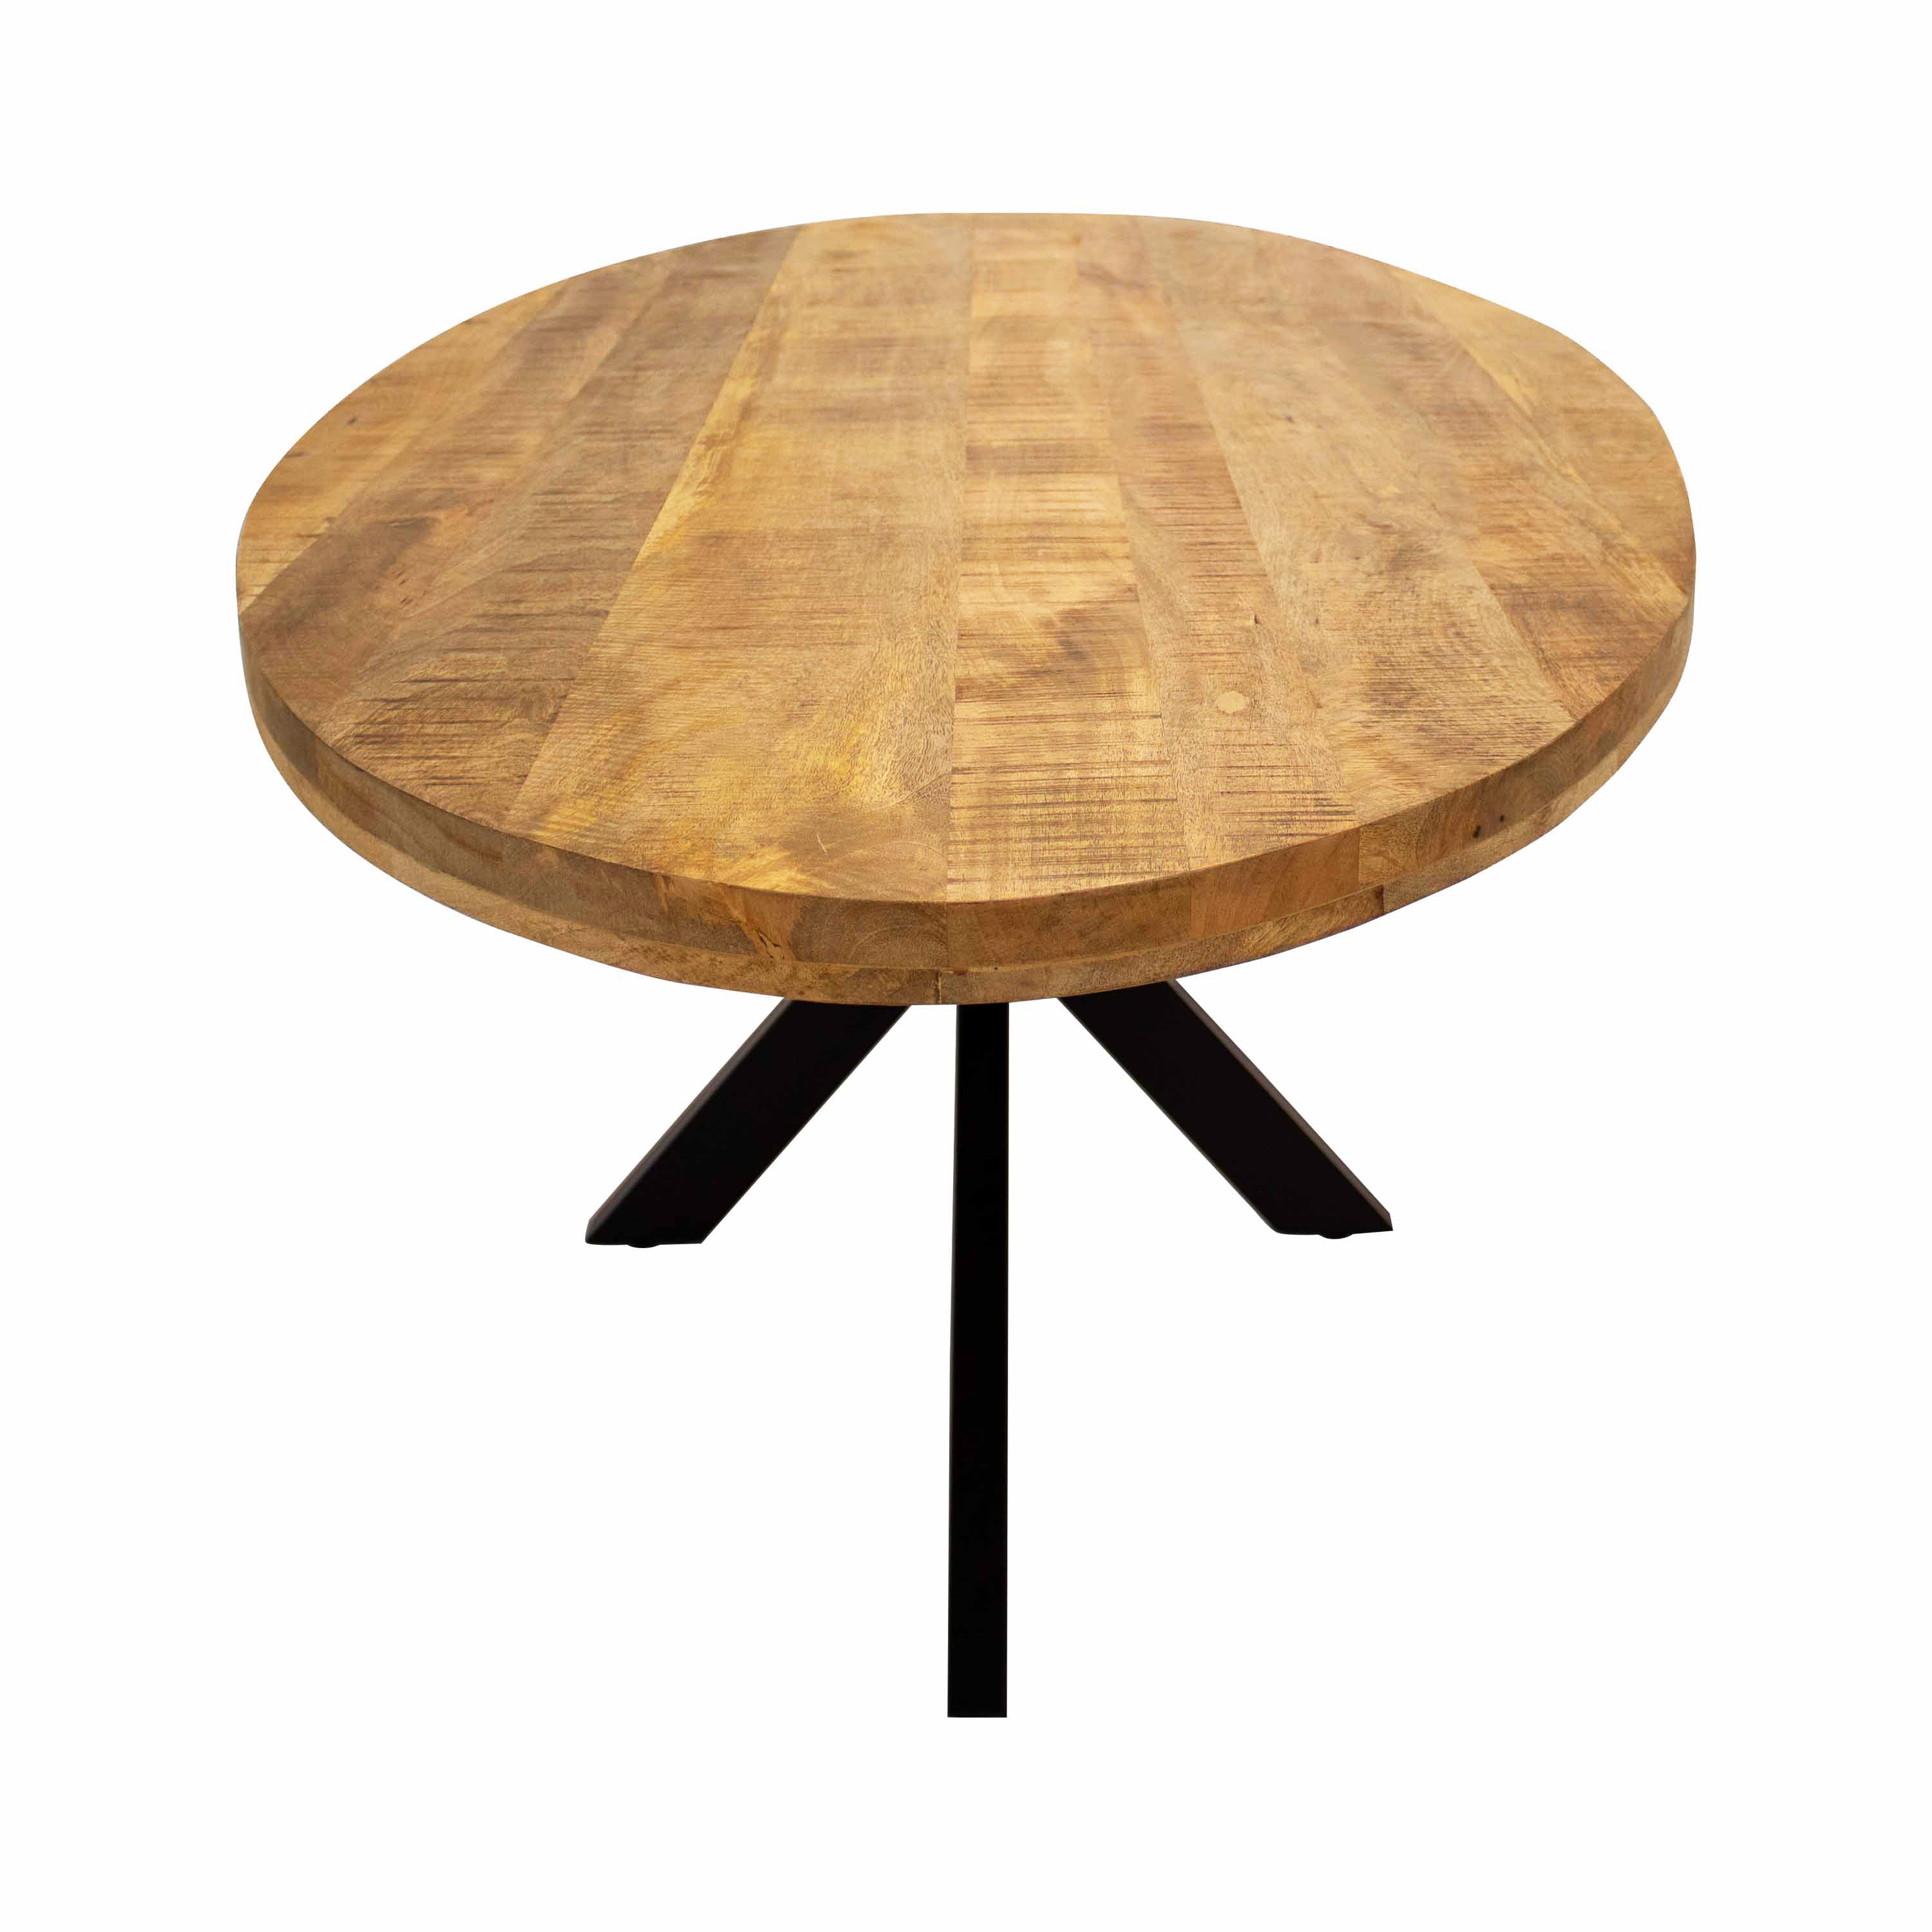 Kick dining table Dax oval - 240cm